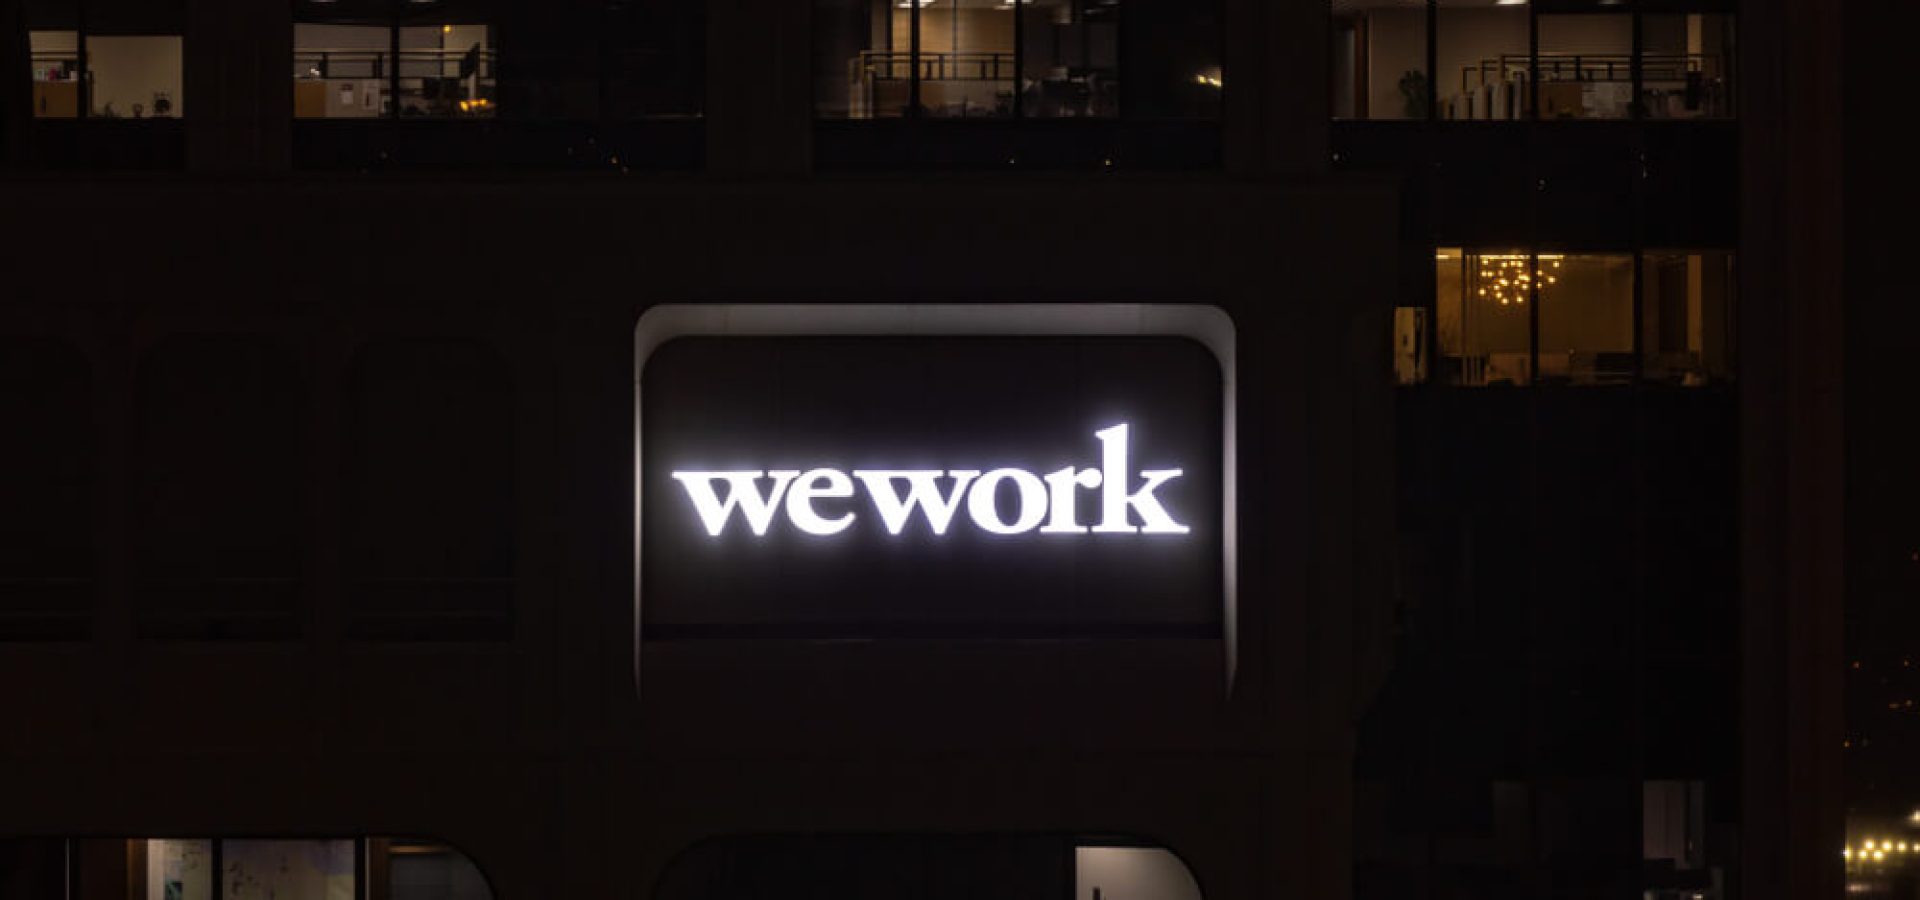 Legere: A night shot of a logo of WeWork company on a side of a building.